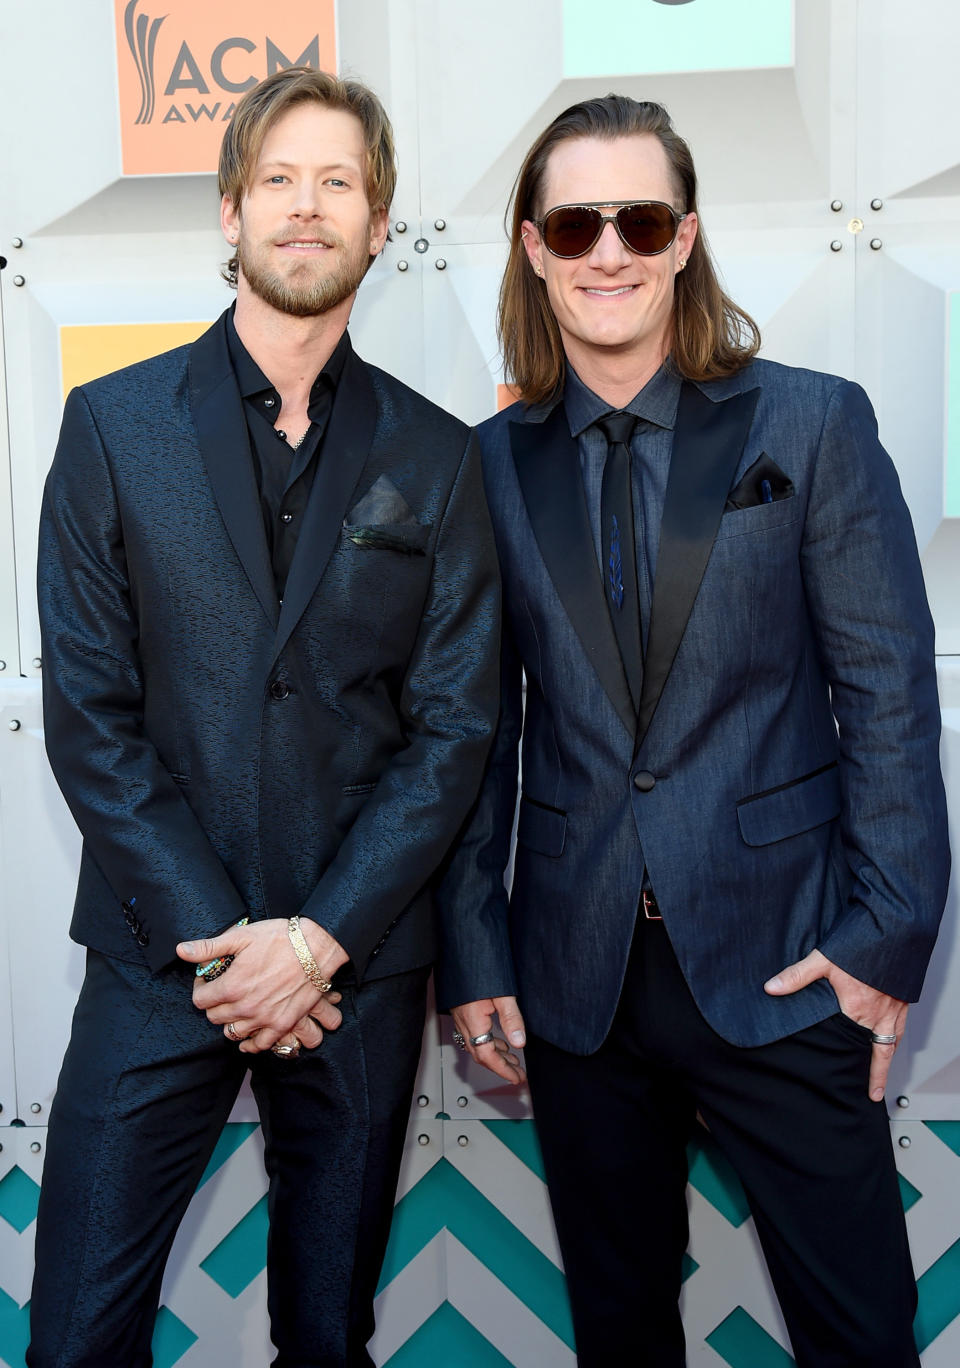 LAS VEGAS, NEVADA - APRIL 03:  Recording artists Brian Kelley (L) and Tyler Hubbard of Florida Georgia Line attend the 51st Academy of Country Music Awards at MGM Grand Garden Arena on April 3, 2016 in Las Vegas, Nevada.  (Photo by Rick Diamond/ACM2016/Getty Images for dcp)